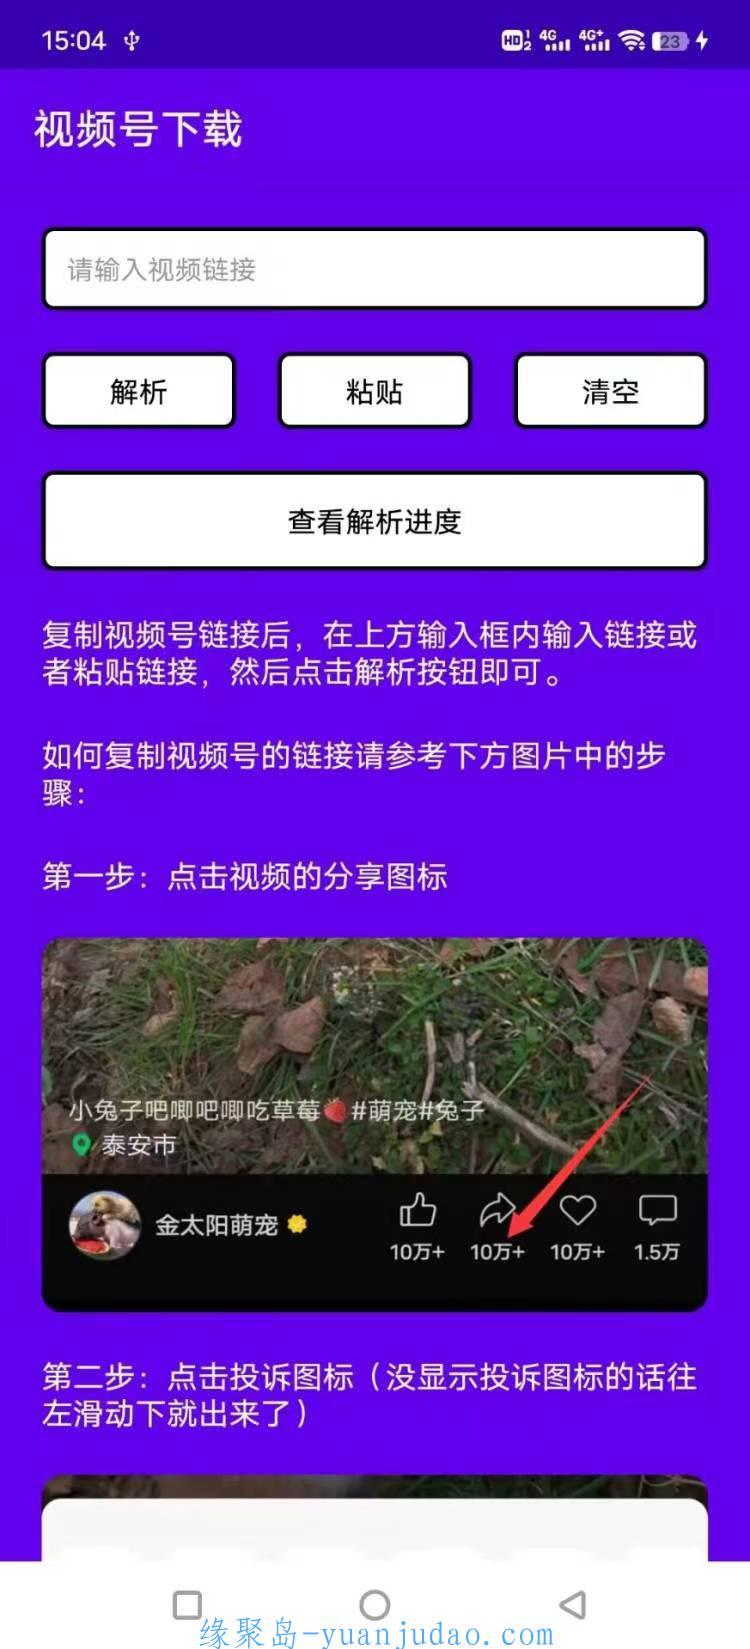 [Android] 视频号、快手、<strong>抖音</strong>、油管等去水印下载全部搞定!